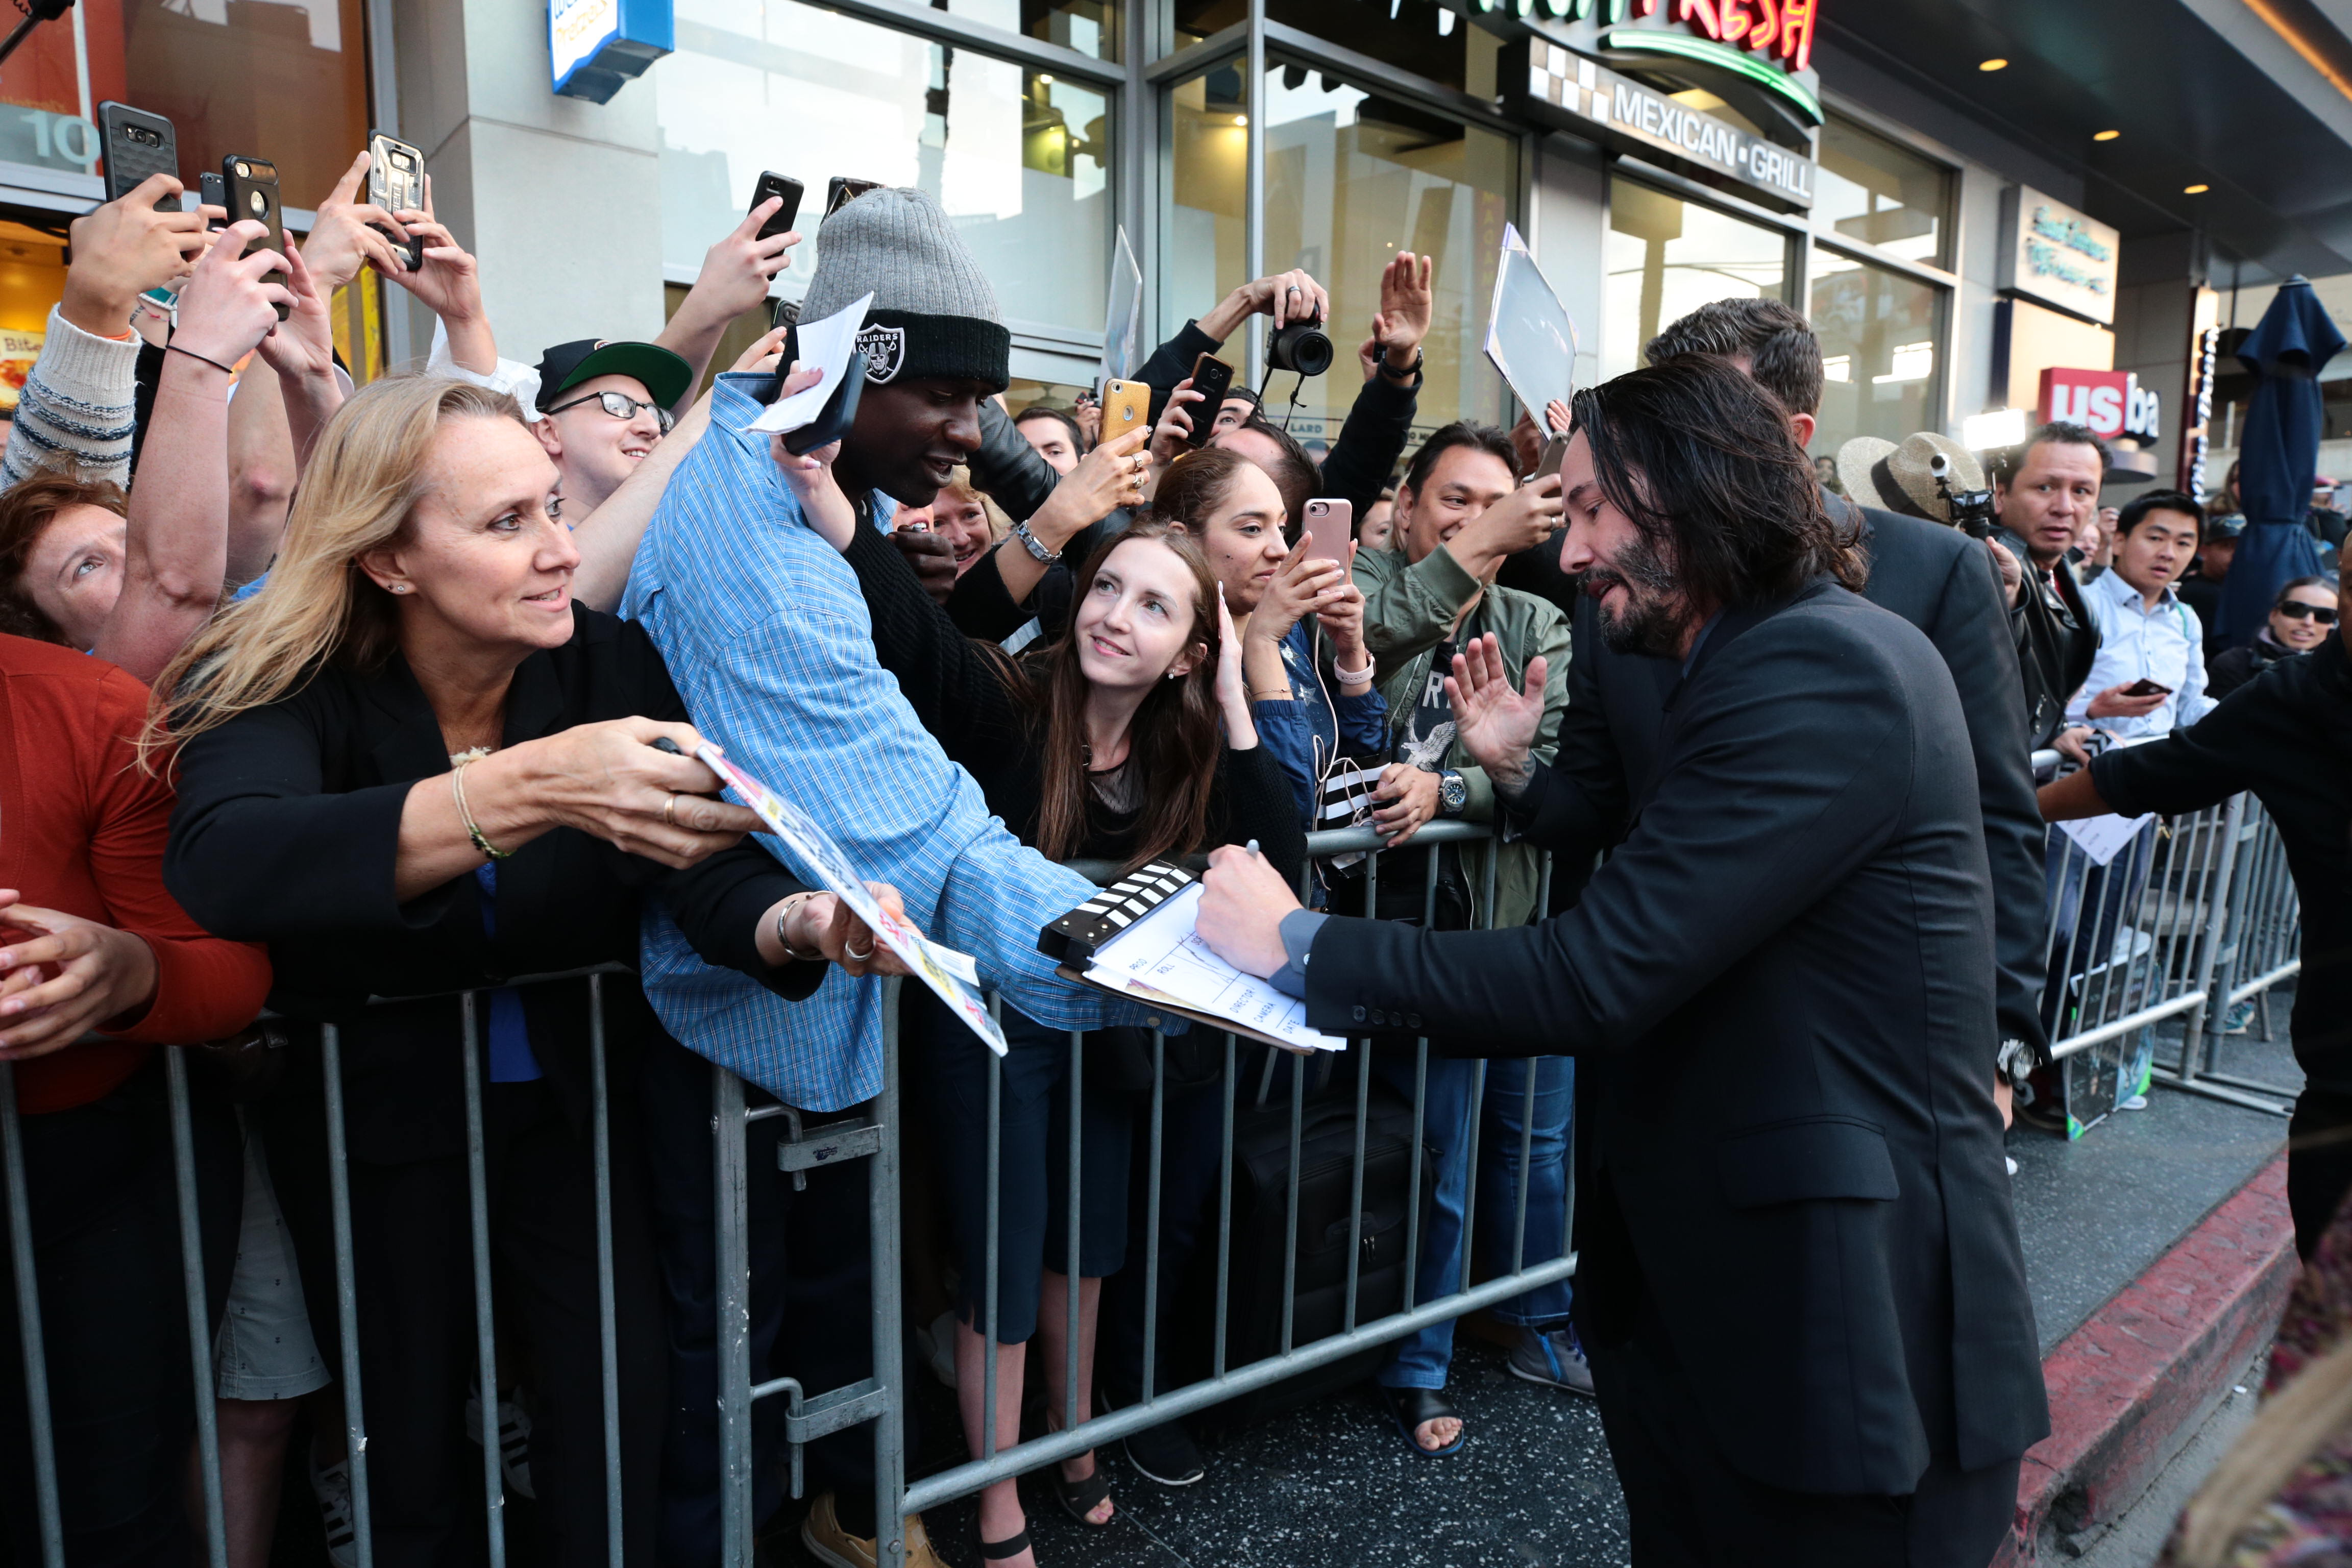 Keanu Reeves at the Special Screening of "John Wick: Chapter 3 - Parabellum" in Los Angeles, on May 15, 2019. | Source: Getty Images